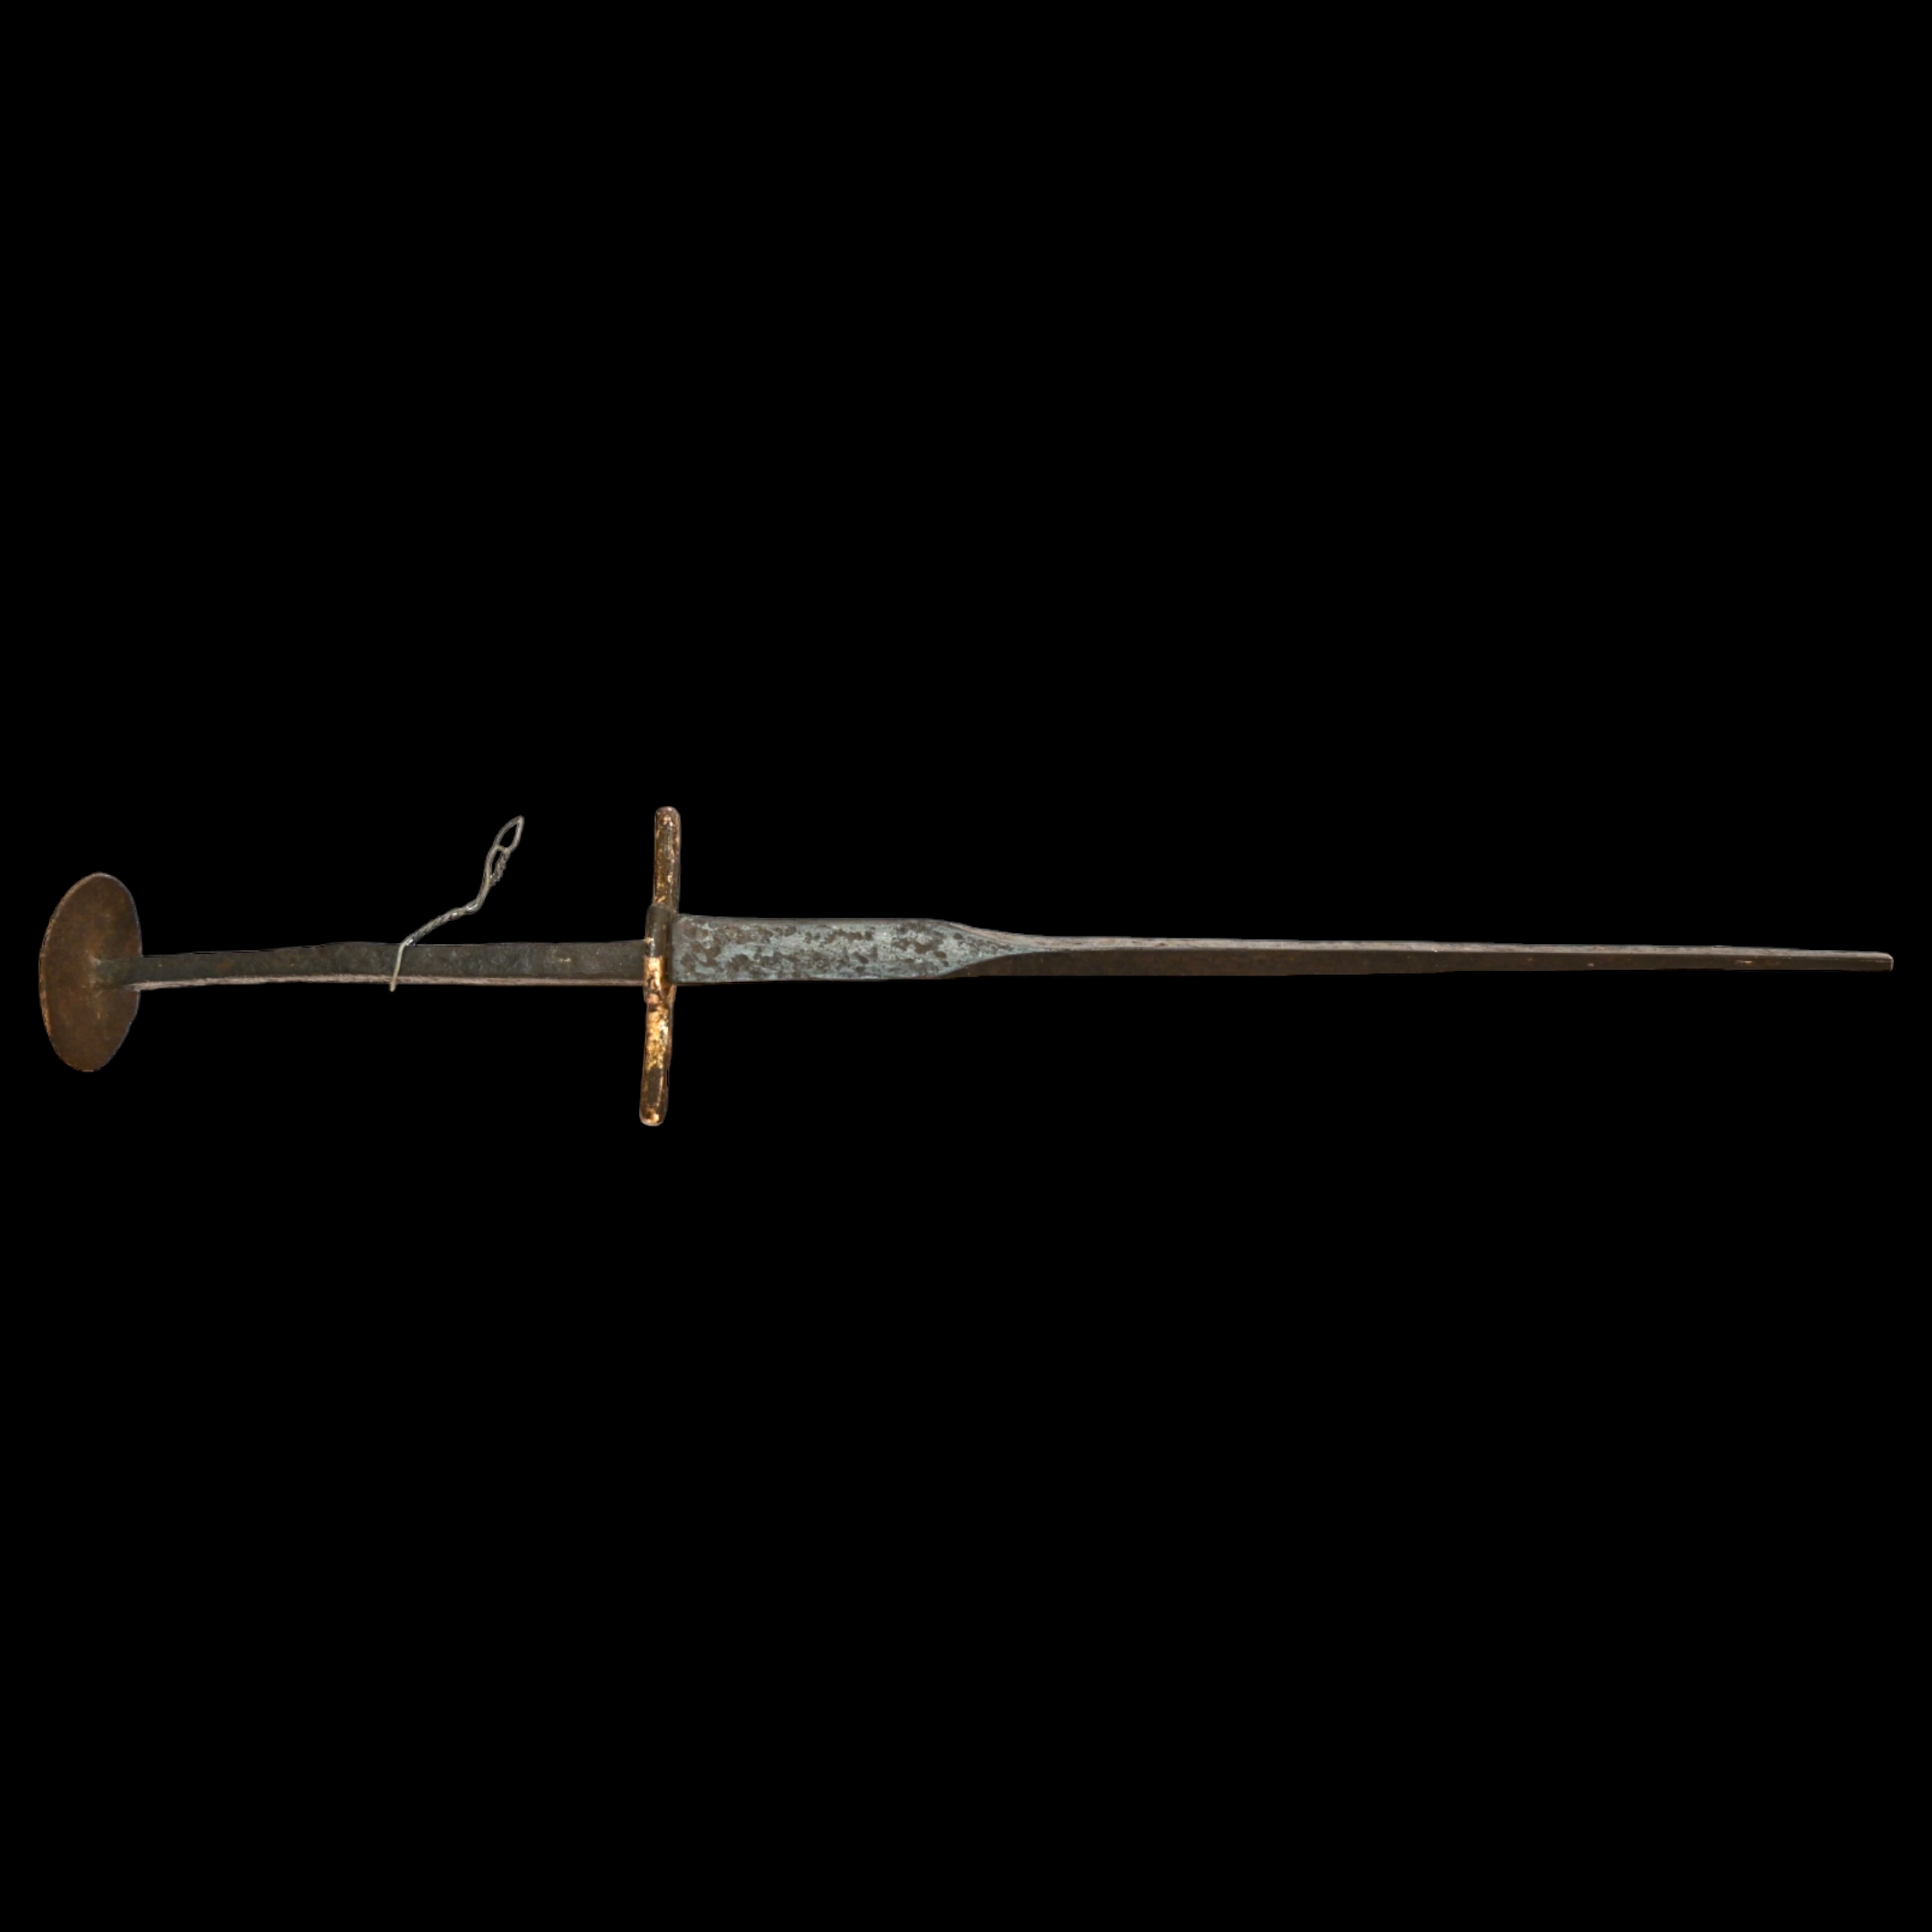 Medieval Dagger 15th century AD. - Image 2 of 5